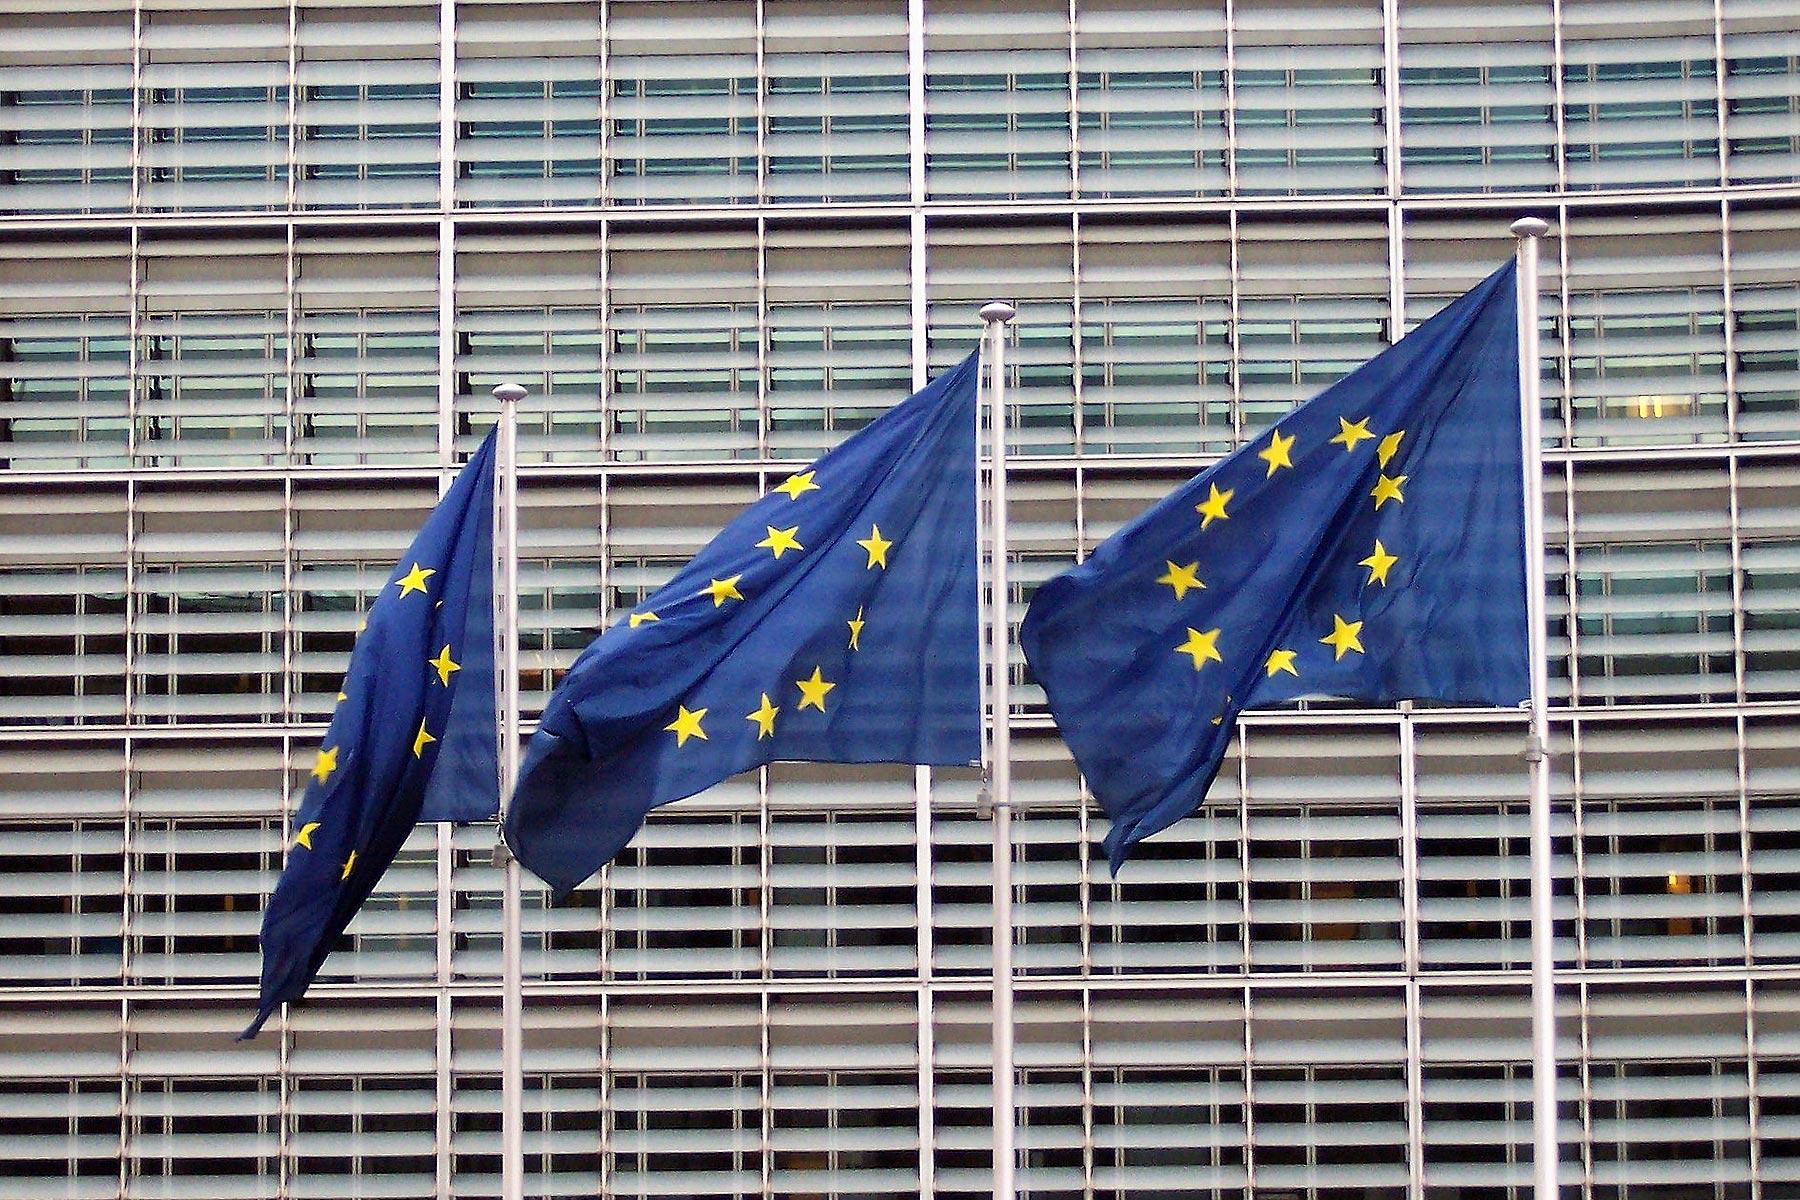 Churches are invited to pray for Europe in the run-up to the EU Parliament elections taking place in member countries between 23 and 26 May. Photo: TeaMeister, under Creative Commons license (CC-BY-NC)